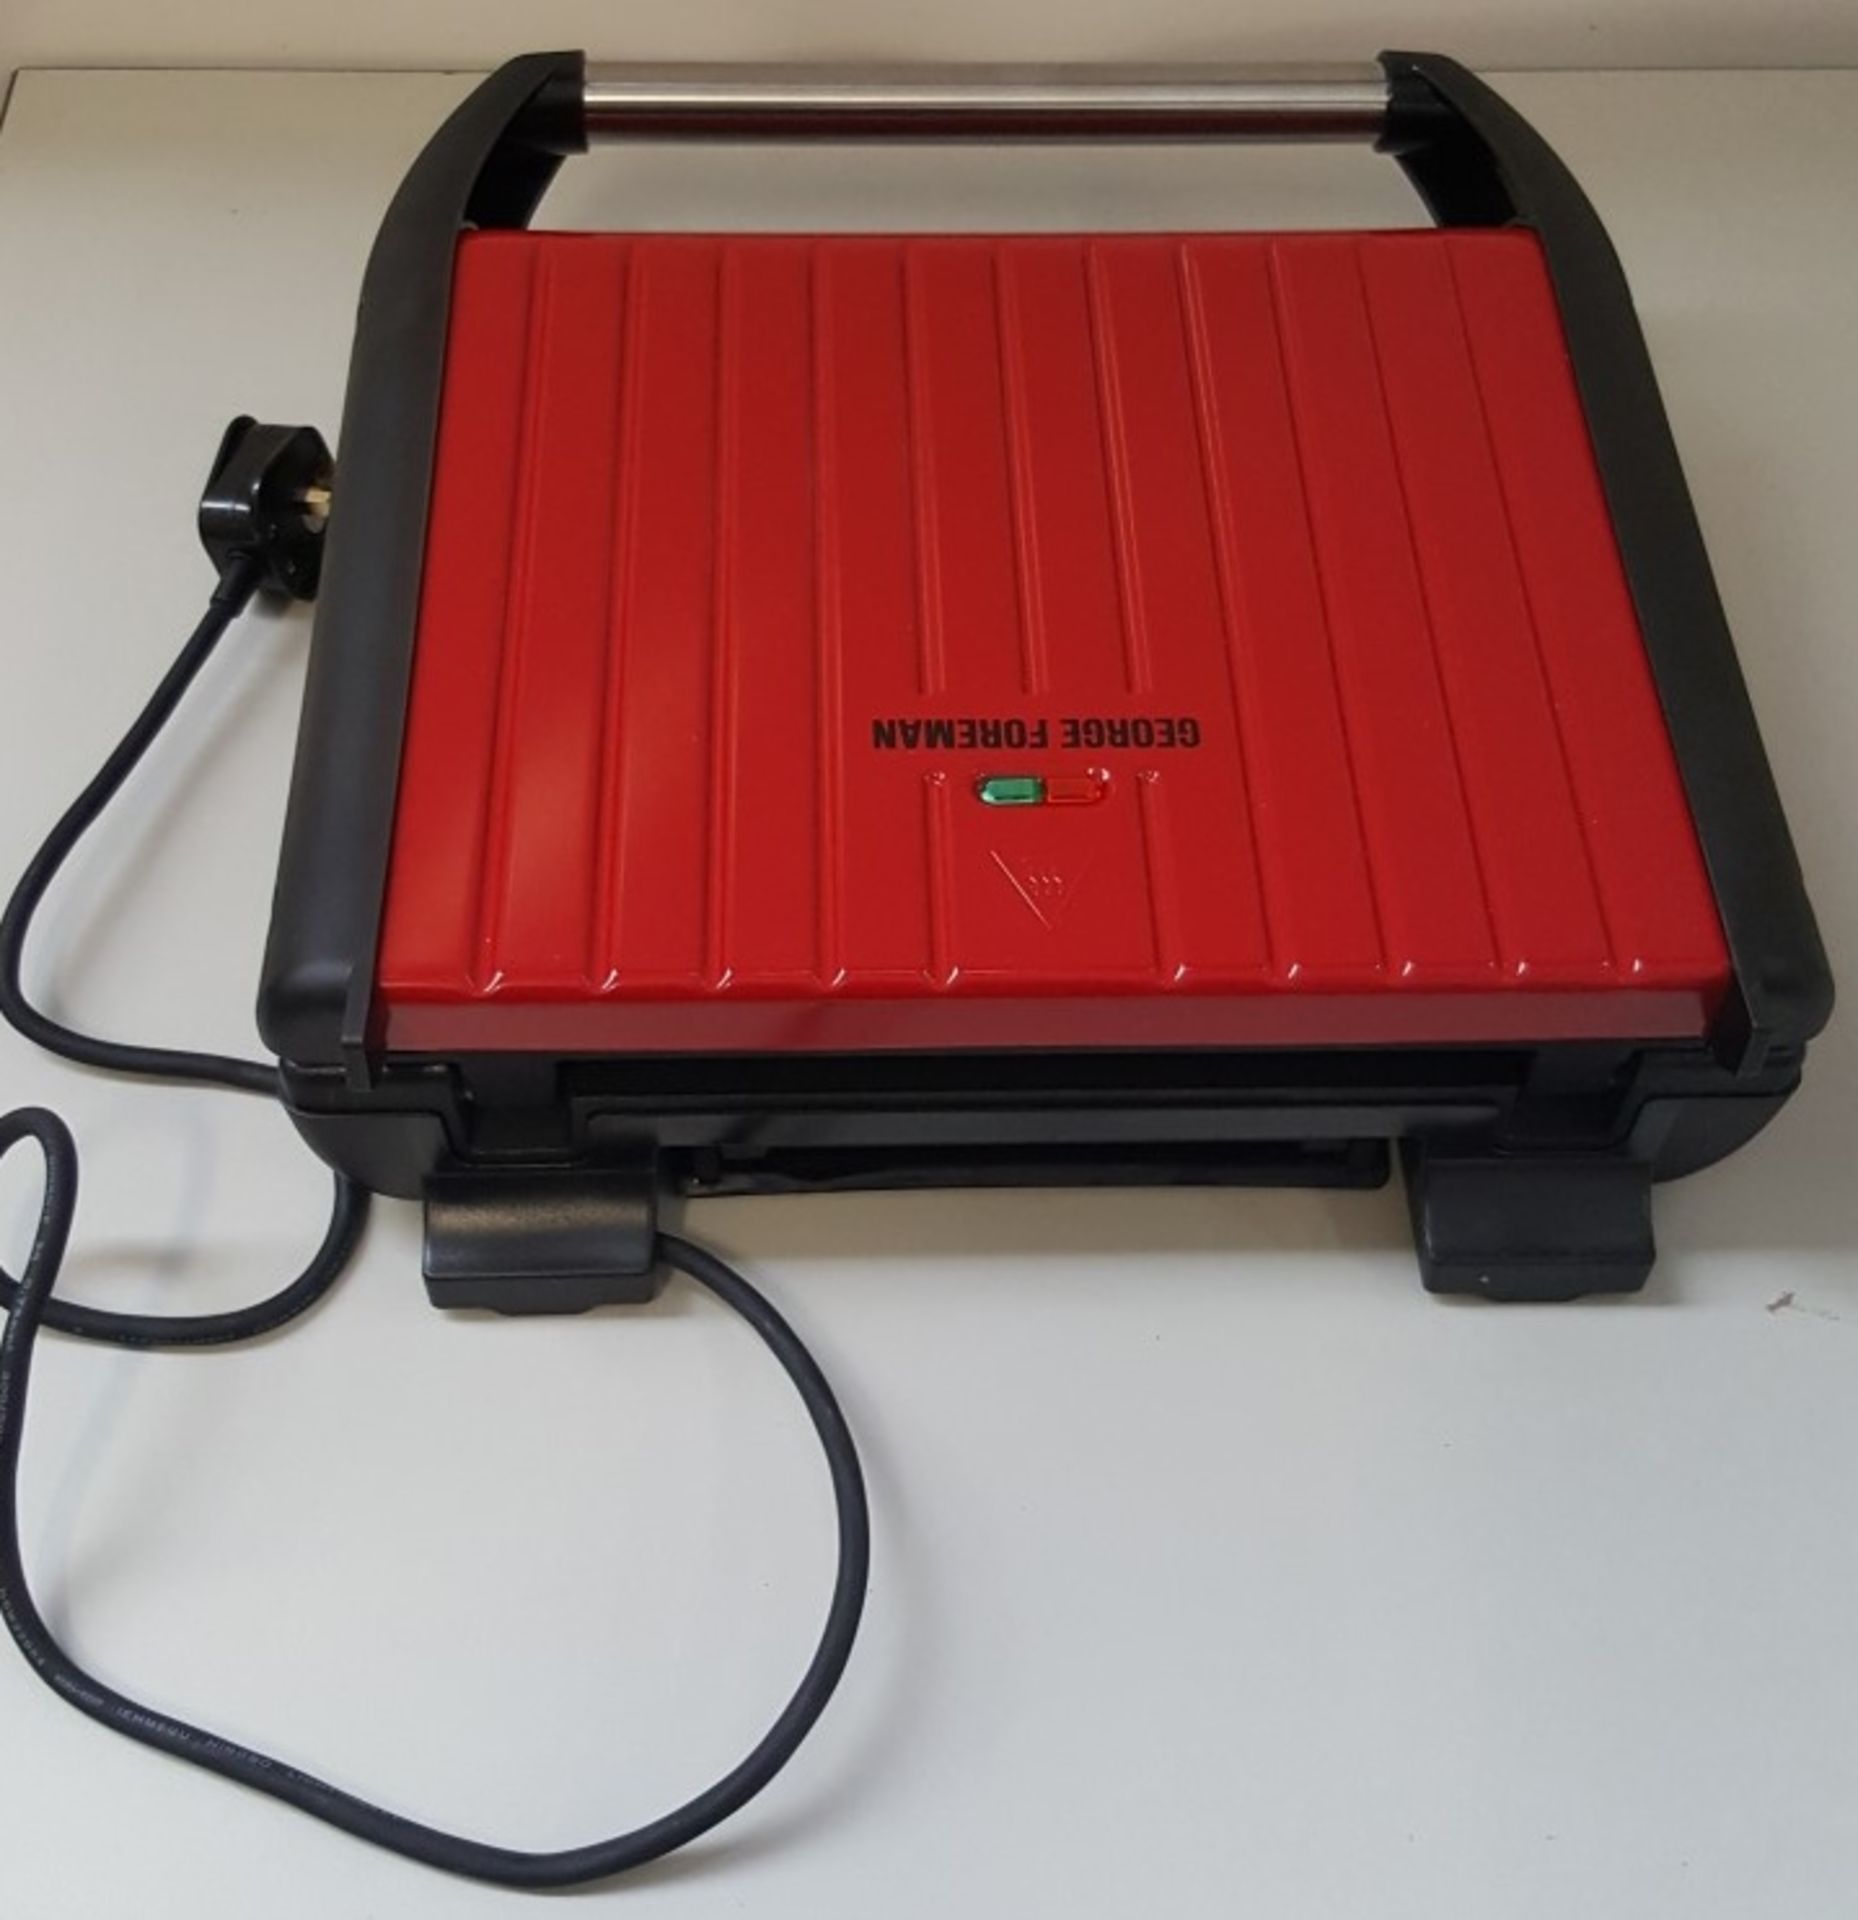 1 x GEORGE FOREMAN 25050 Entertaining Grill - Red - Ref CBU95 - Image 5 of 5